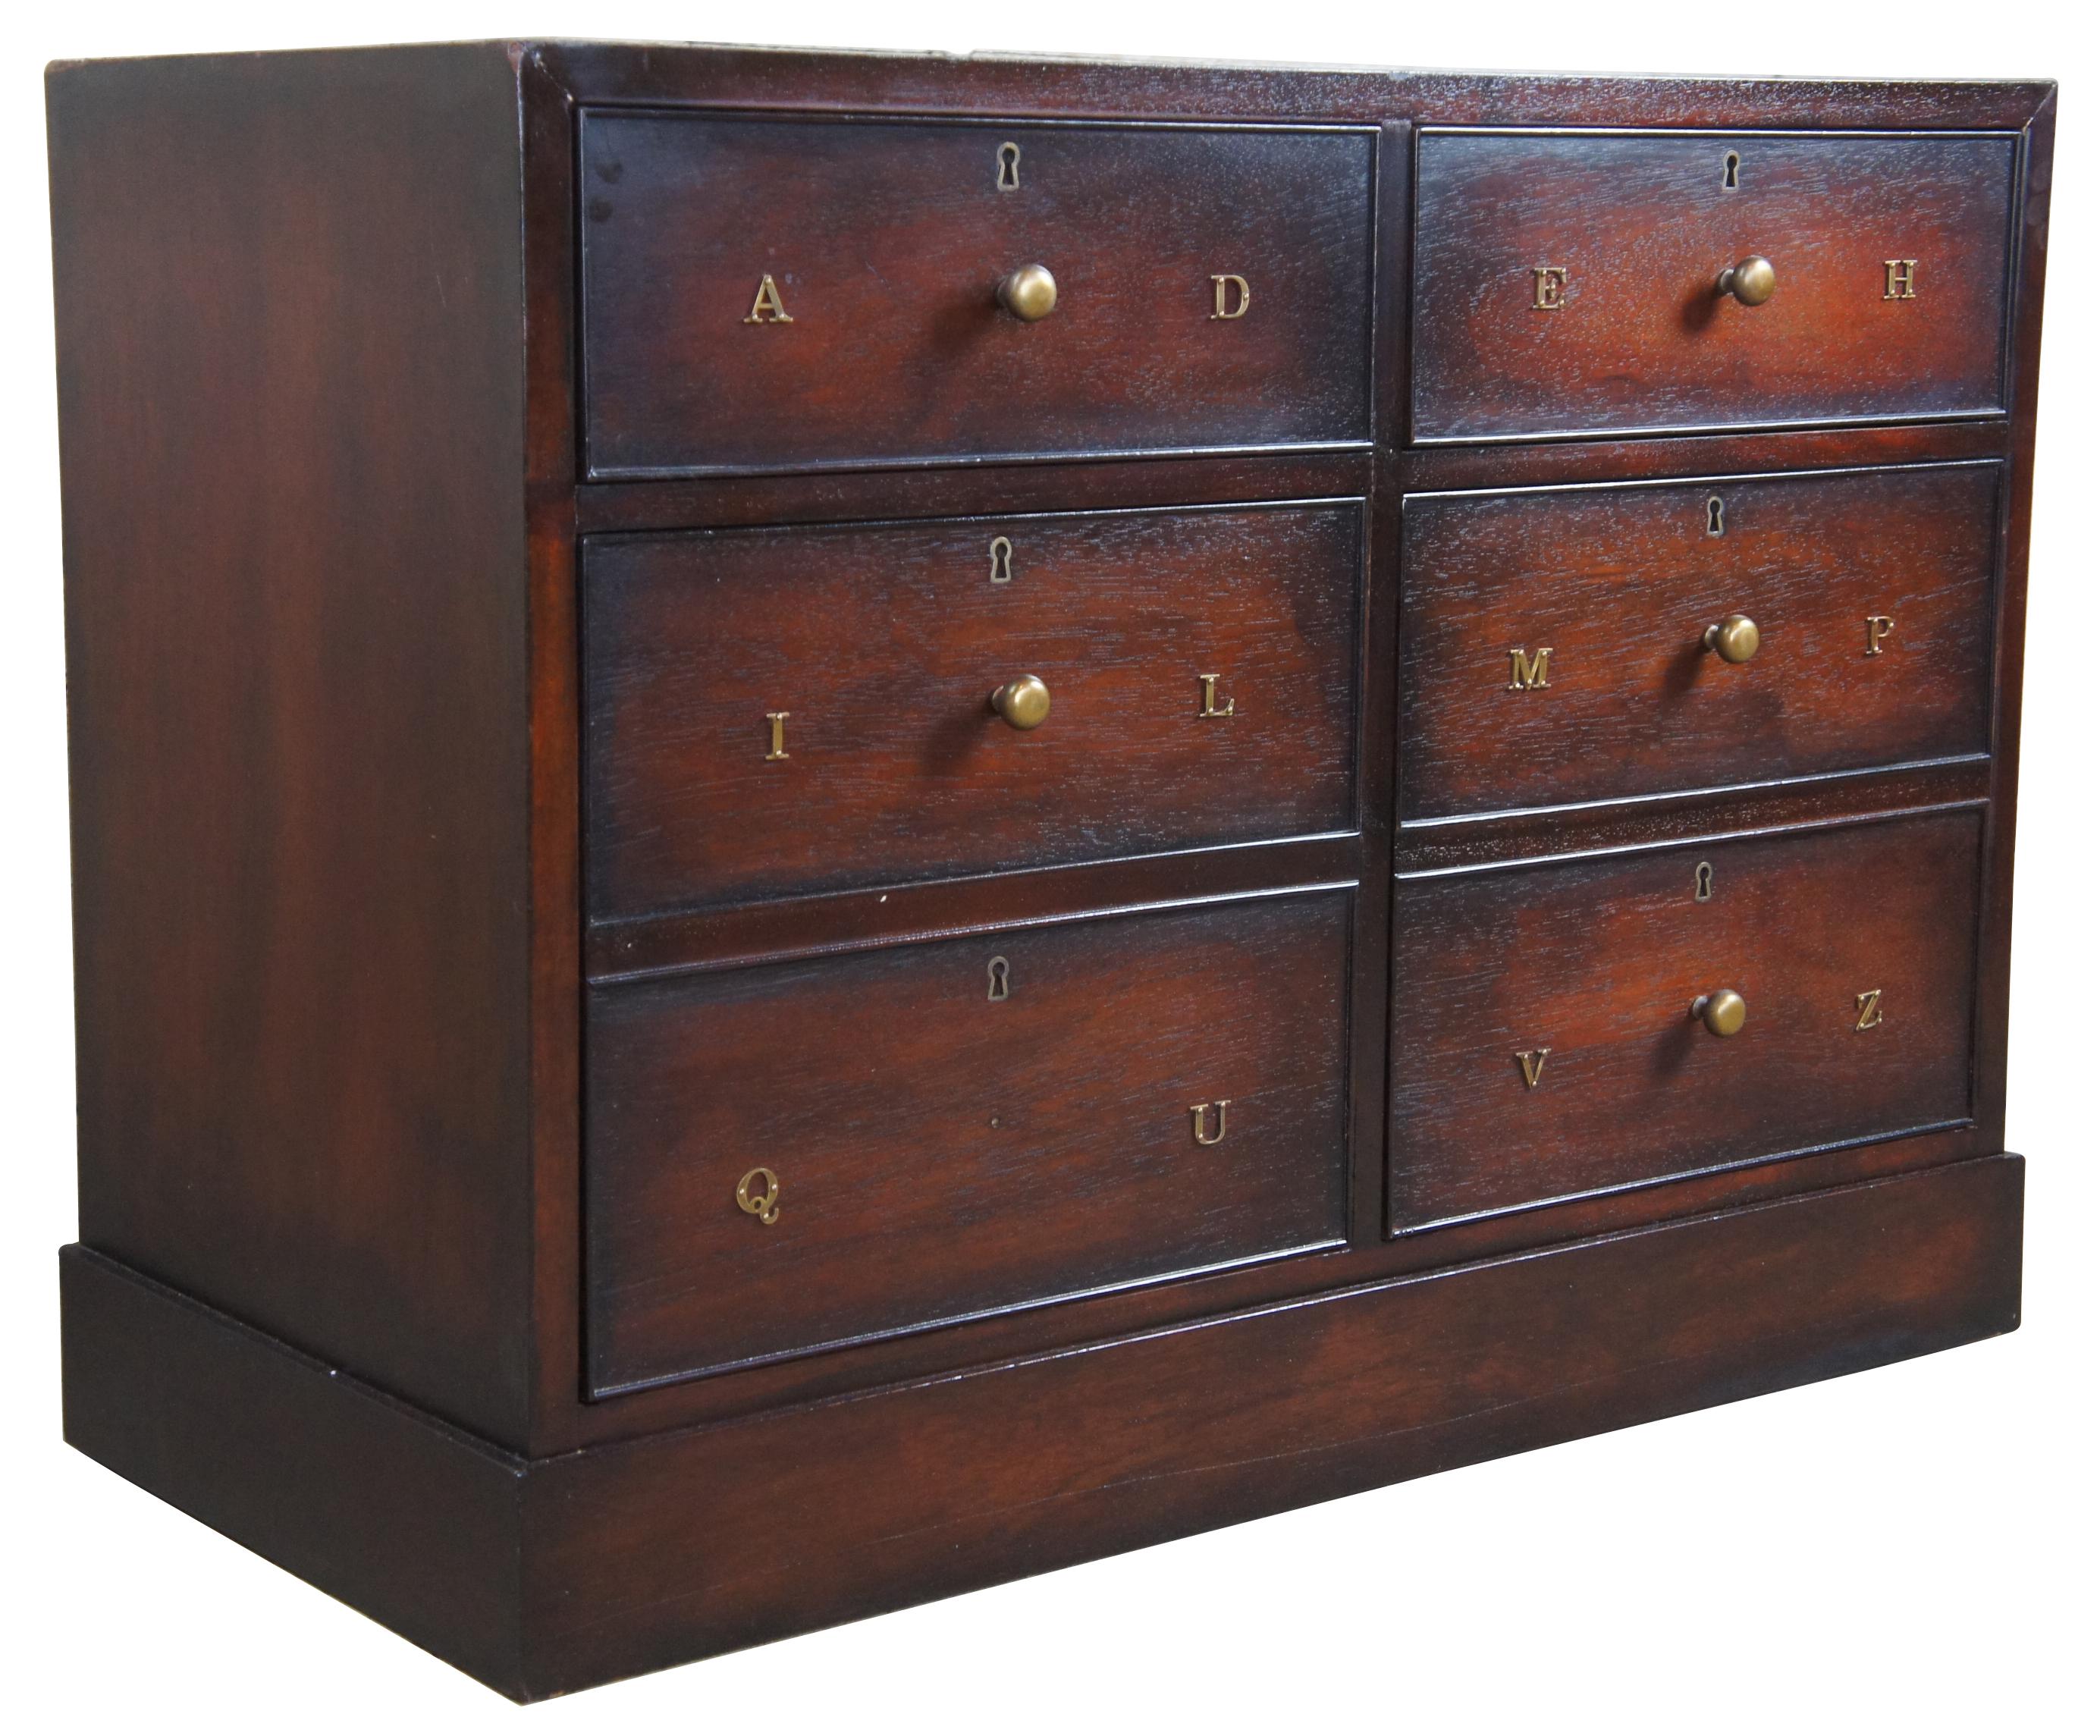 Ralph Lauren new bohemian ABC dresser block chest bachelor file cabinet

The new bohemian chest by Ralph Lauren. Features an A through Z brass accent file cabinet motif, but it’s actually a dresser or chest of four drawers.